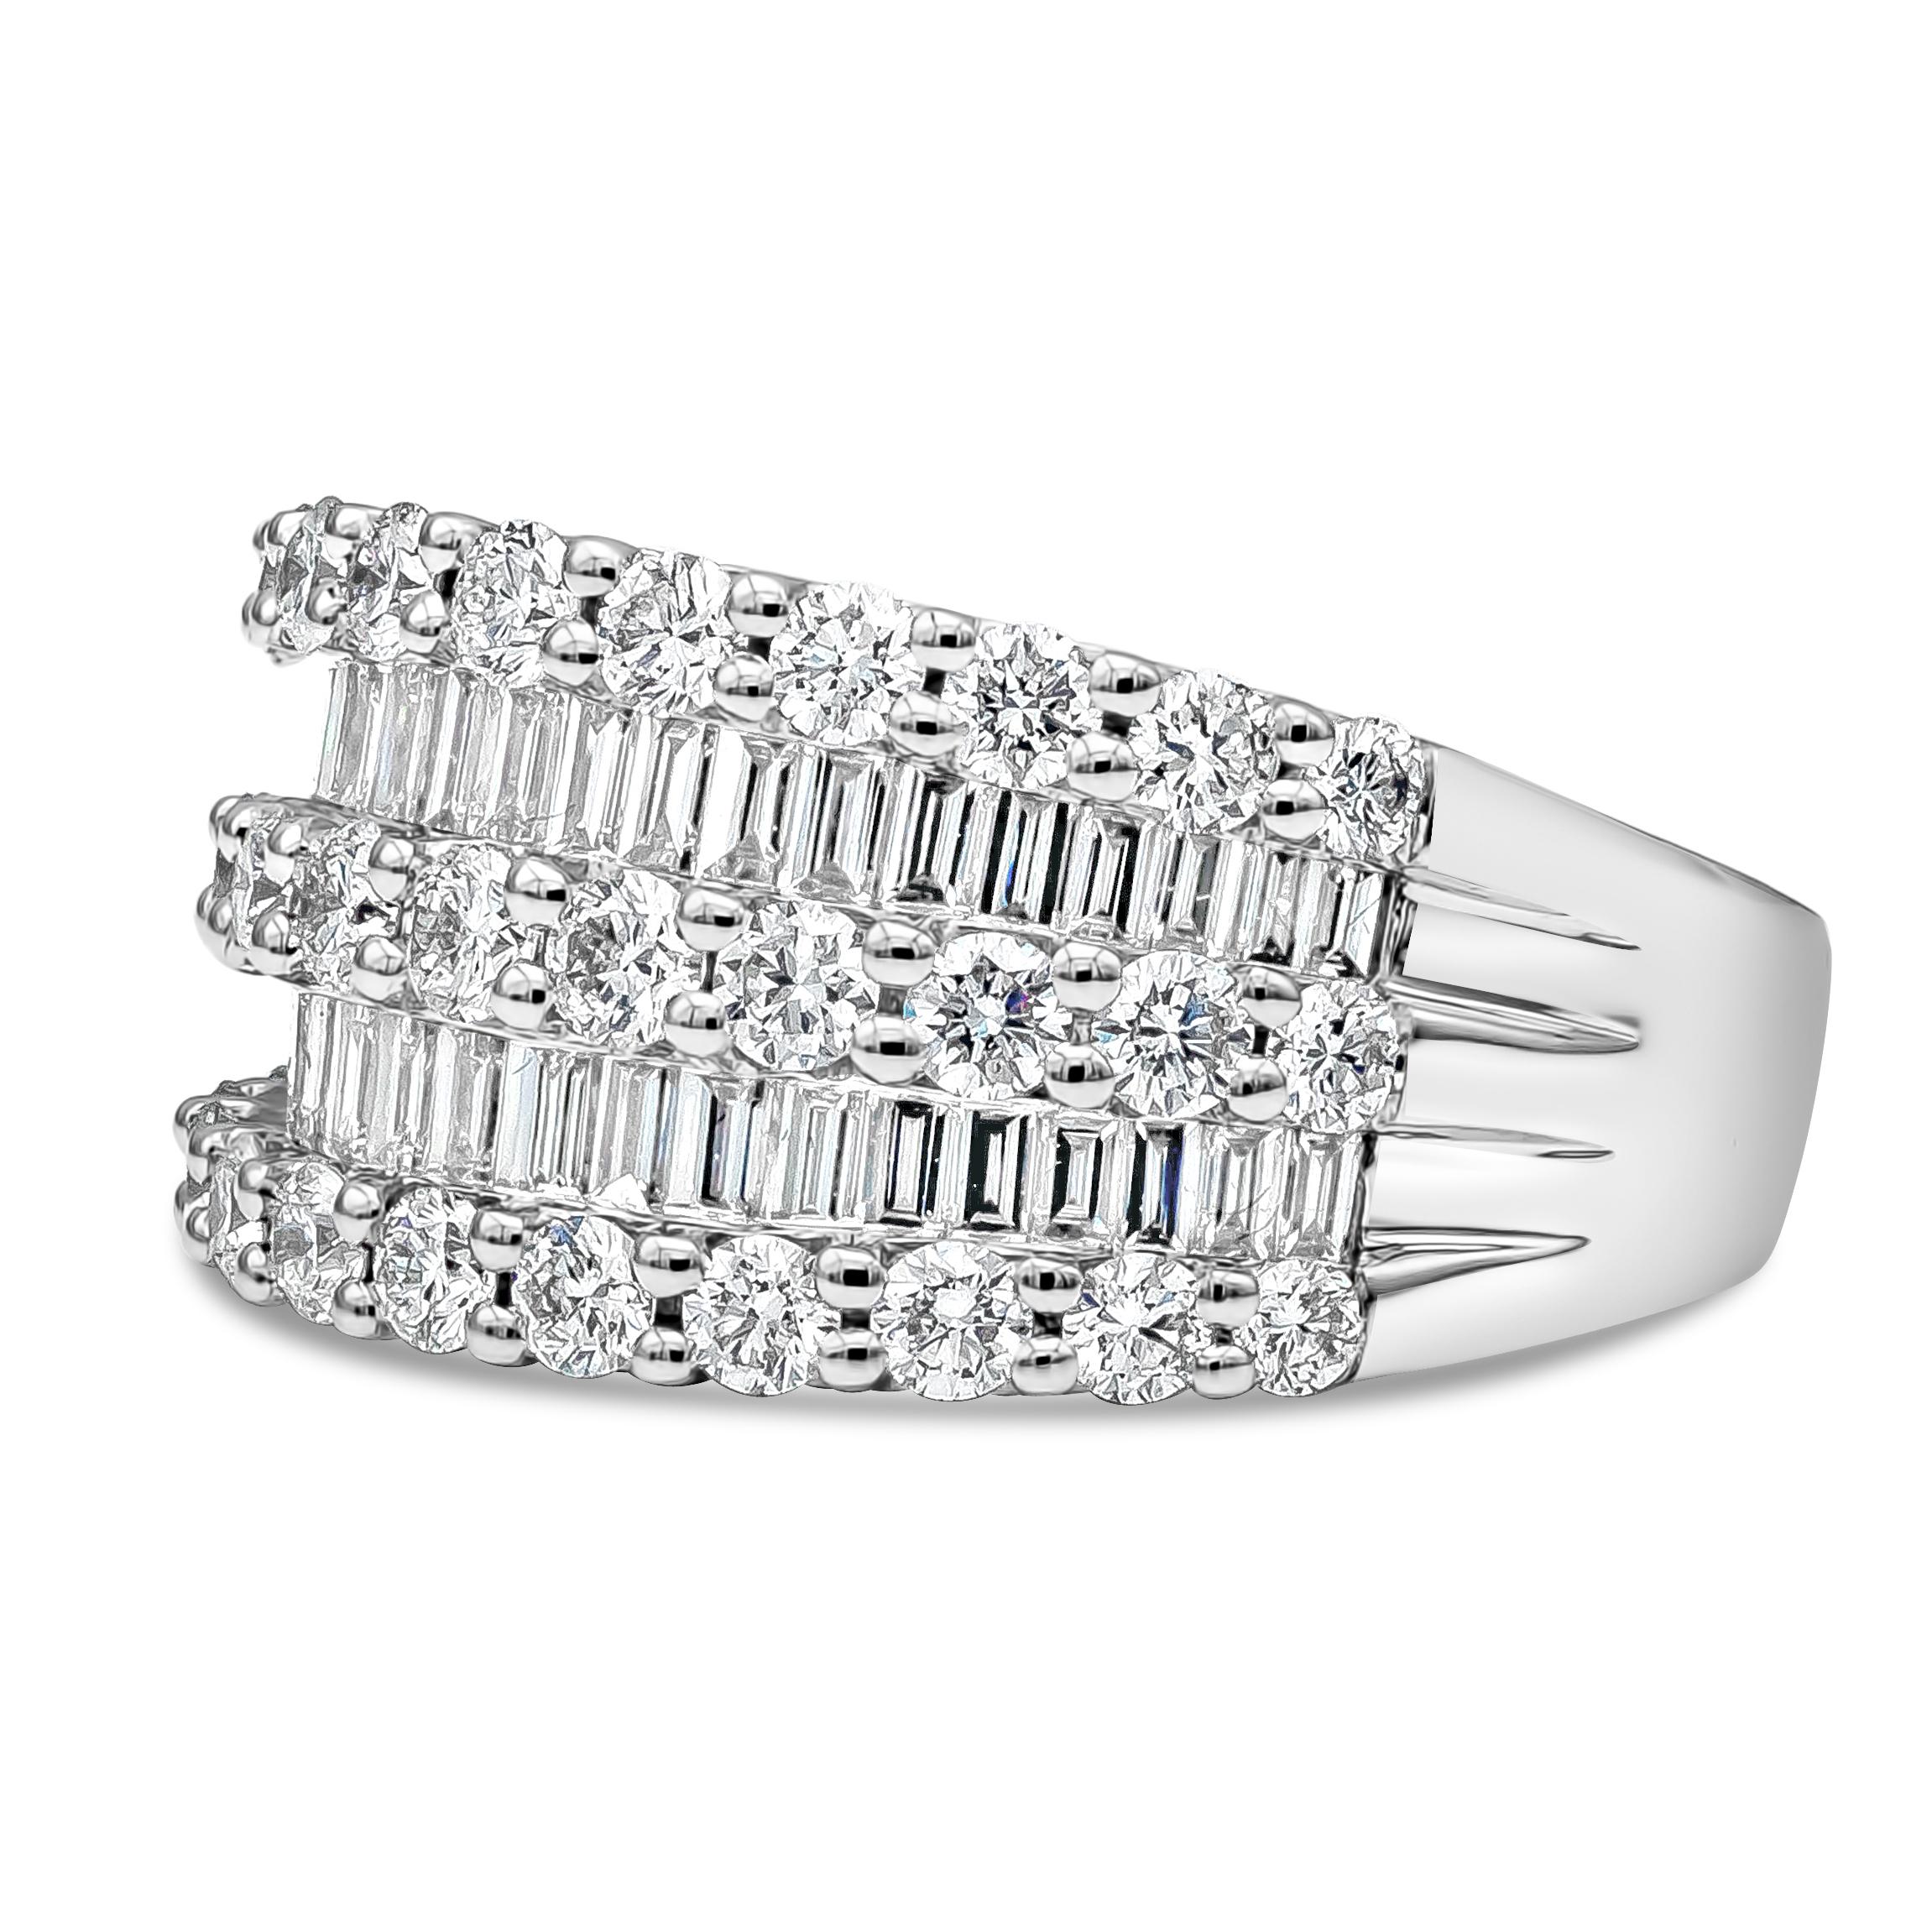 A timeless and fashionable wide ring showcasing 40 baguette diamonds that elegantly graduating in size of approximately 9mm -11.15mm, designed with three rows of  33 brilliant round diamonds. Baguette diamonds weigh 0.85 carats total, F Color and VS